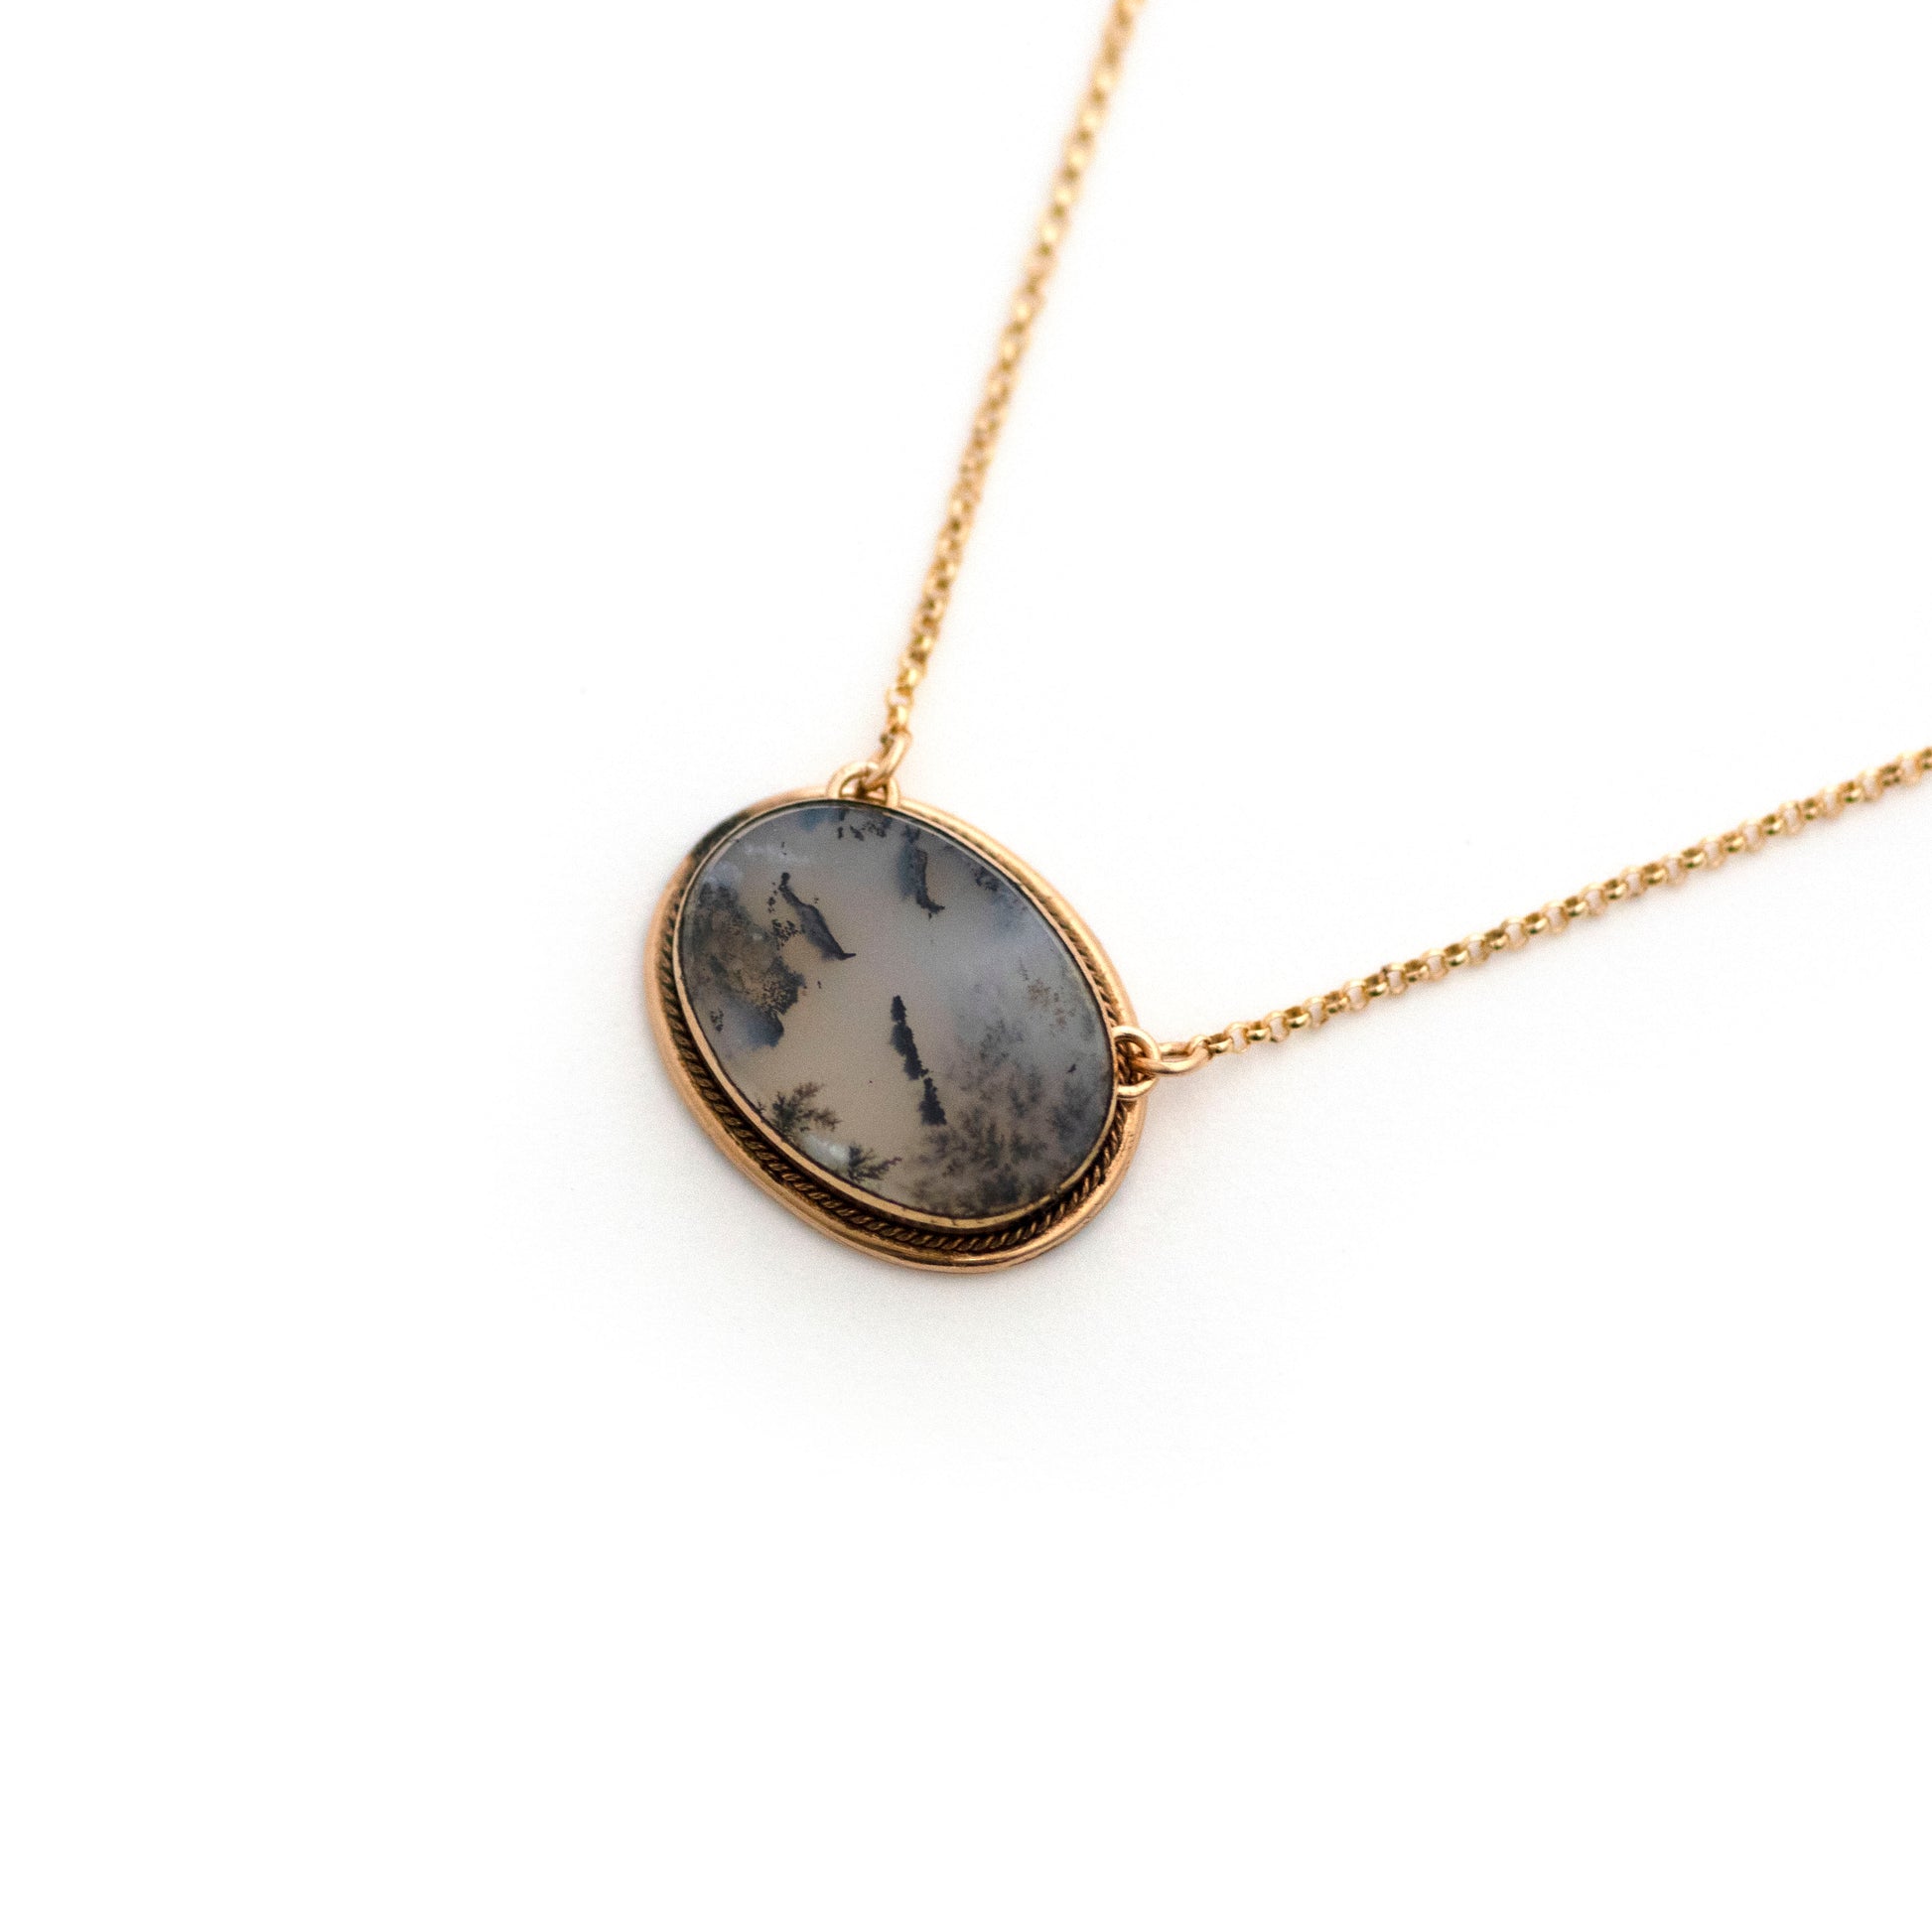 This one-of-a-kind conversion necklace is made up of:  Gold filled Victorian brooch pendant from the late 1800s with dendritic moss agate. 